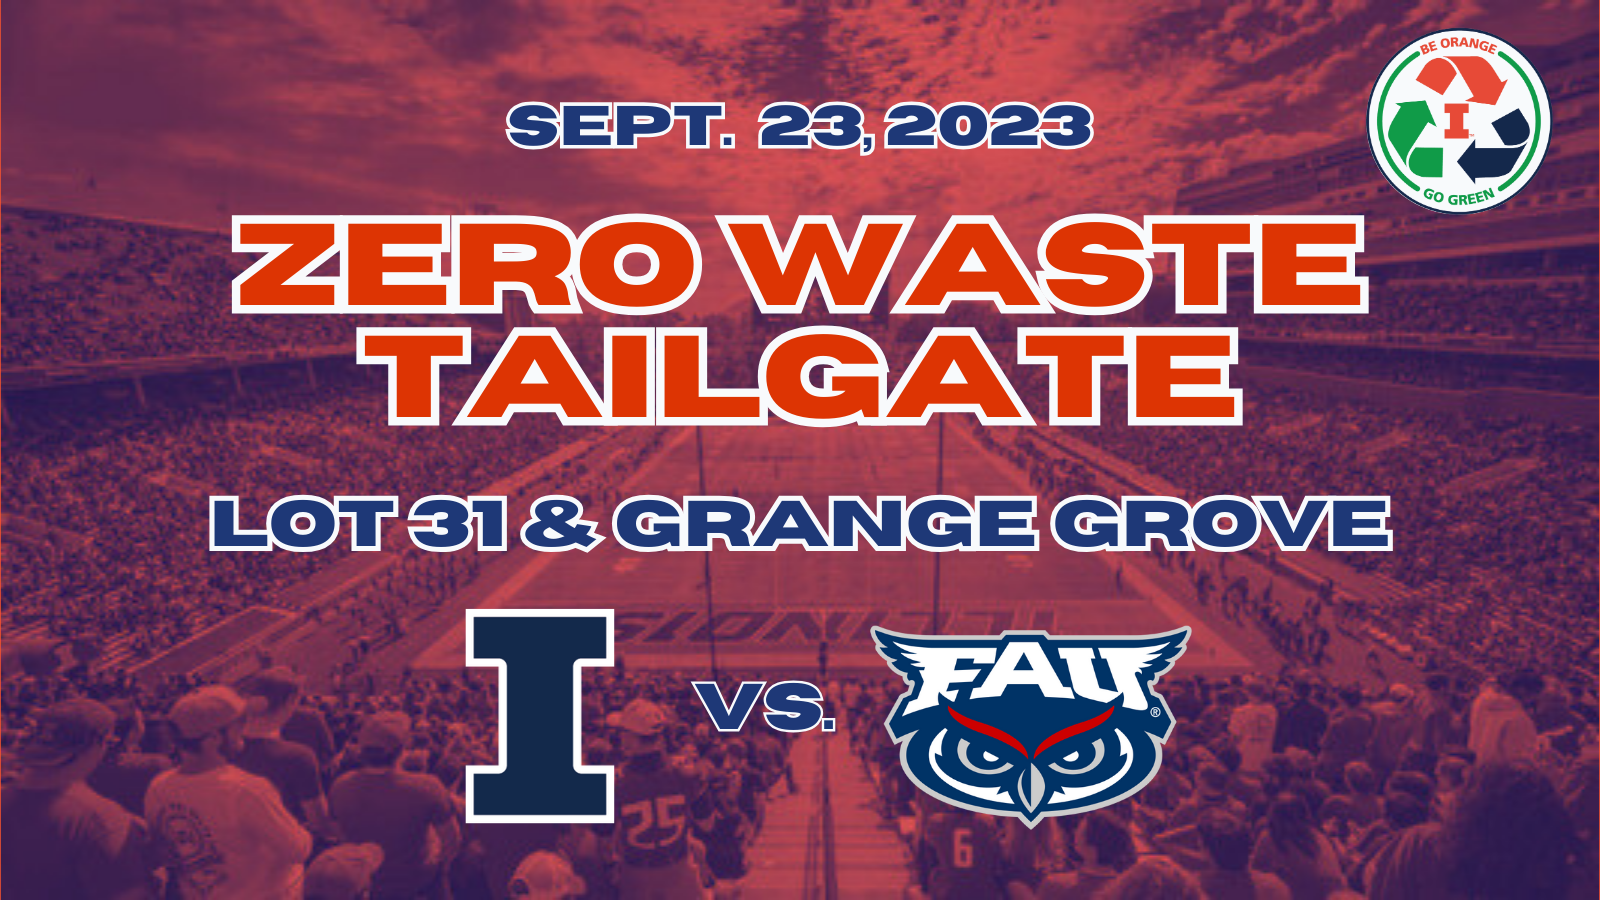 Illinois Football takes on Florida Atlantic University (FAU) on Saturday, September 23, at Memorial Stadium. Before the non-conference game, several Orange and Blue recycling boxes and a bright green dumpster will be available to help Fighting Illini fans recycle bottles and cans, which will prevent more items from reaching the landfill.